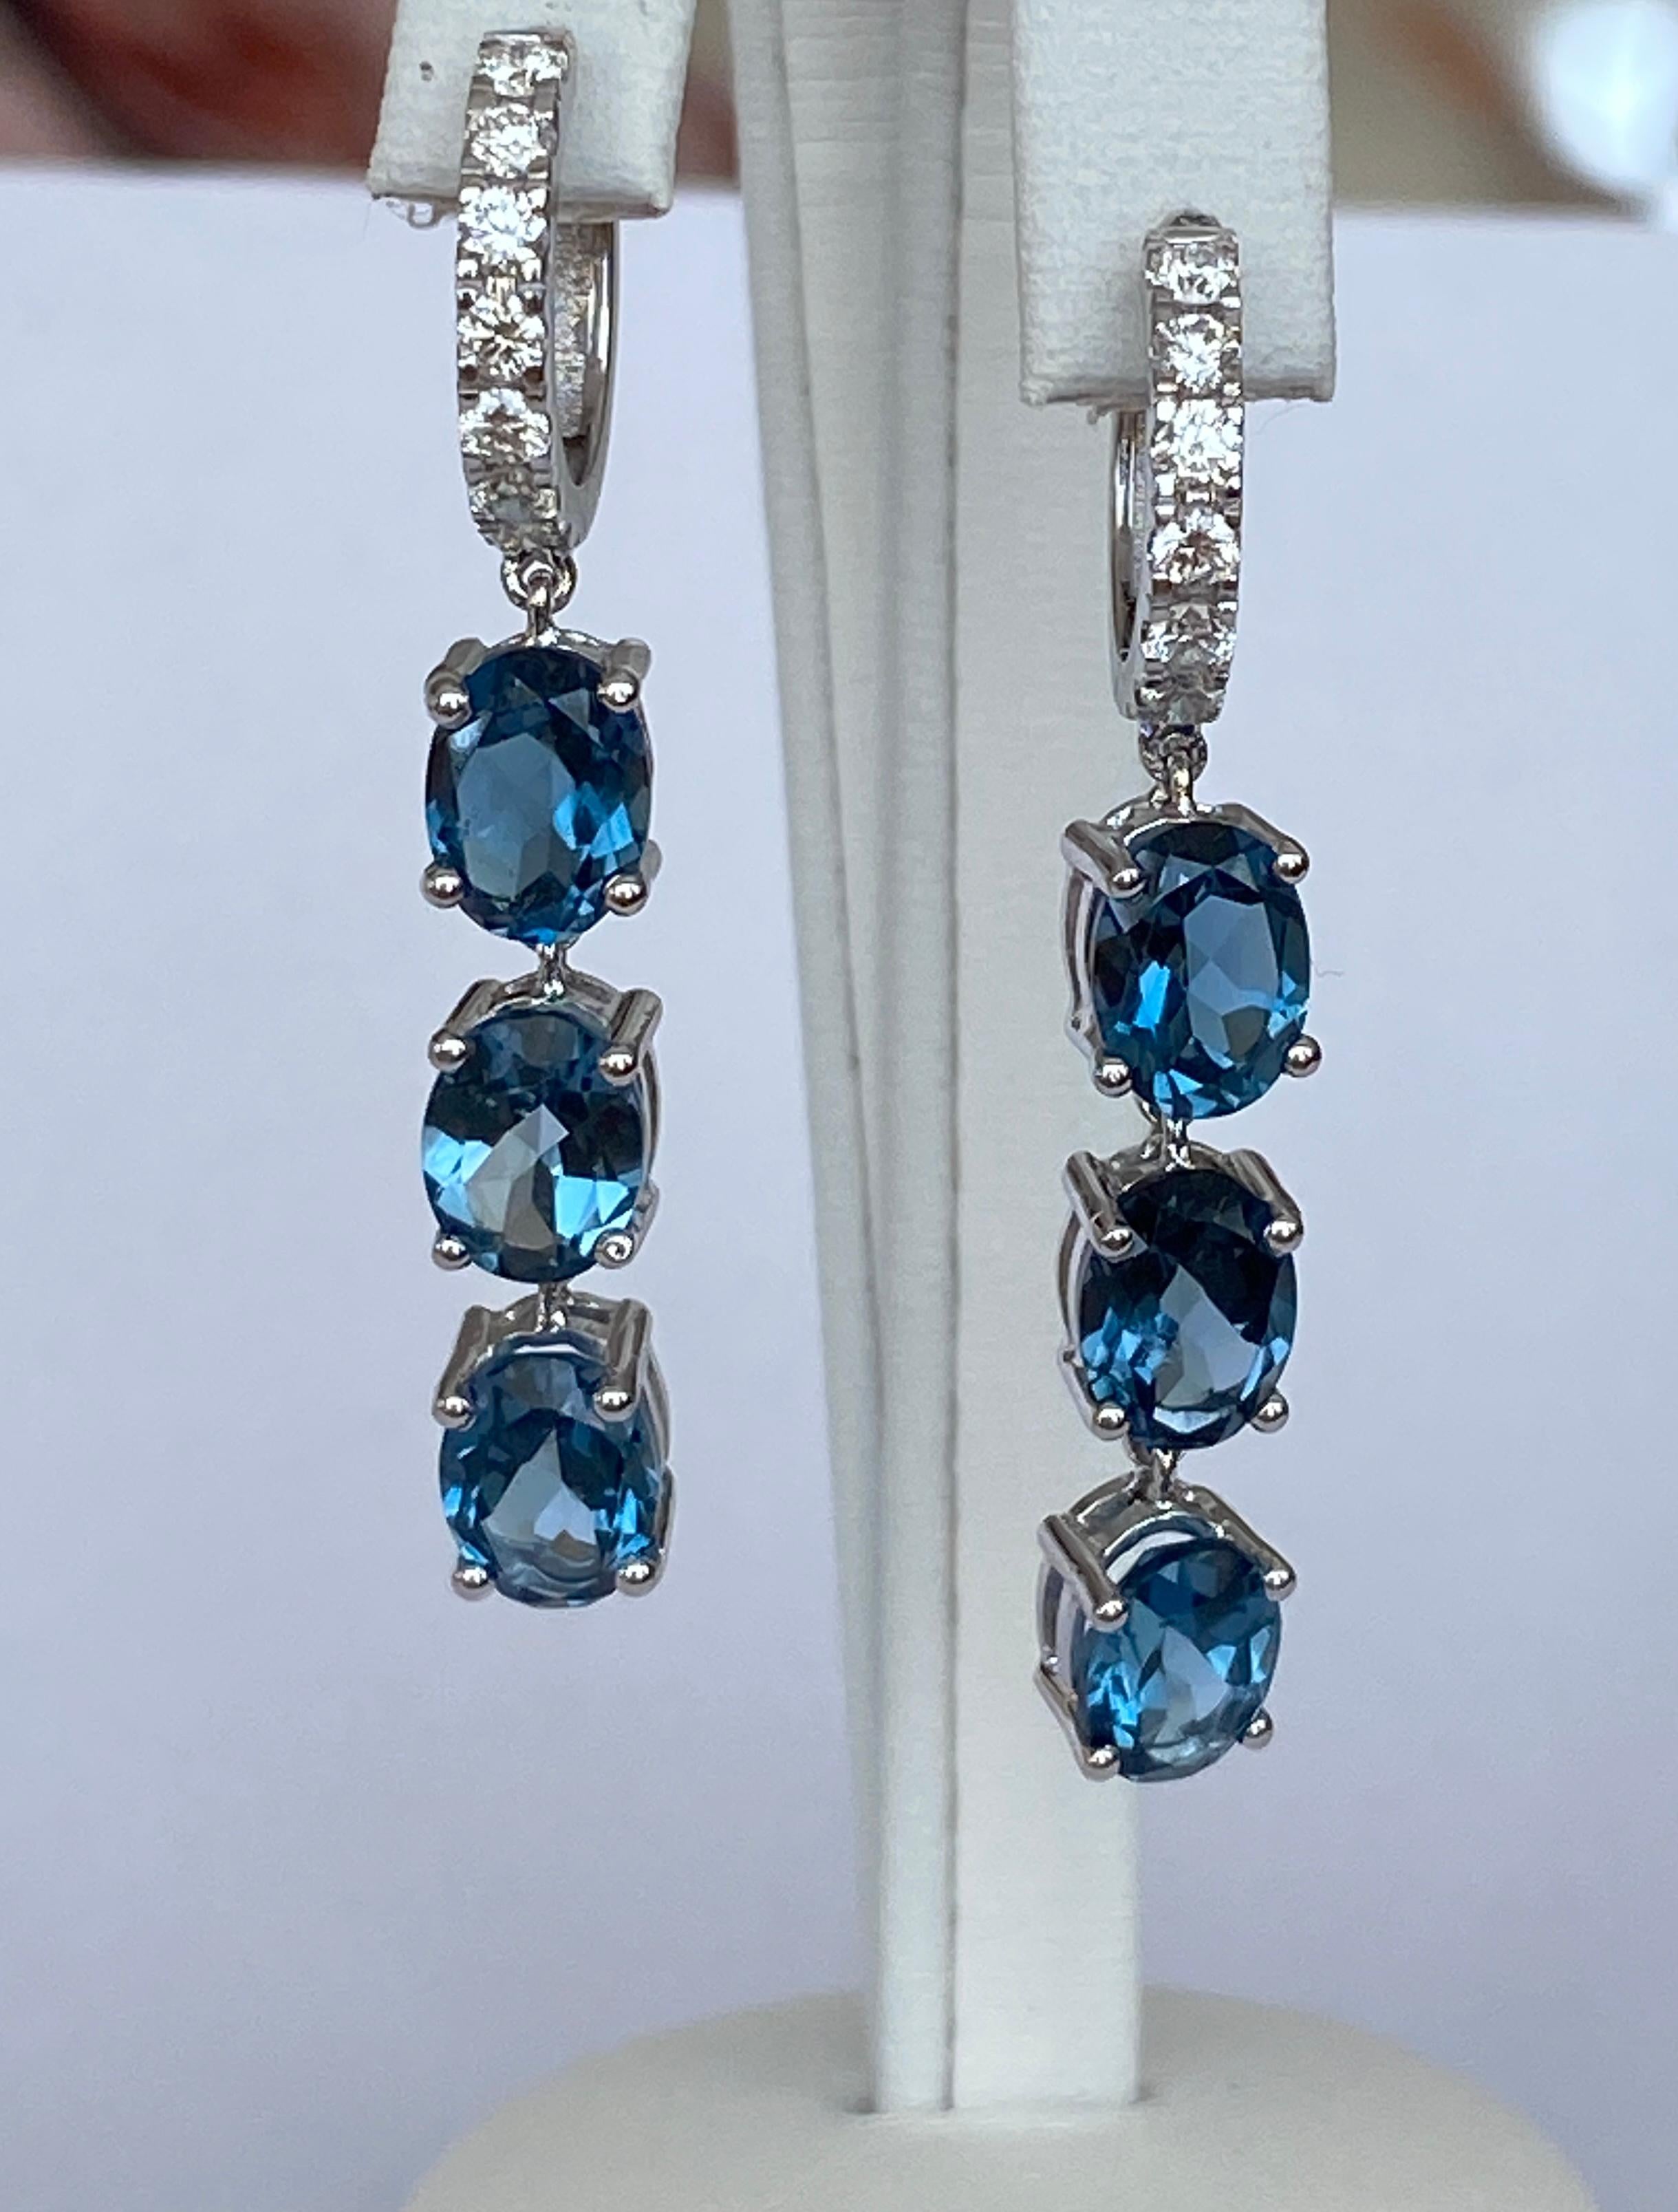 Offered are exceptionally beautiful earrings in 18 kt white gold with 6 stones  oval shape London Blue Topaz  approx. 10.00 ct and decorated with 14 stones brilliant cut diamonds of approx. 0.65 ct F/G/VS. Own certificate for the diamonds.
Gold